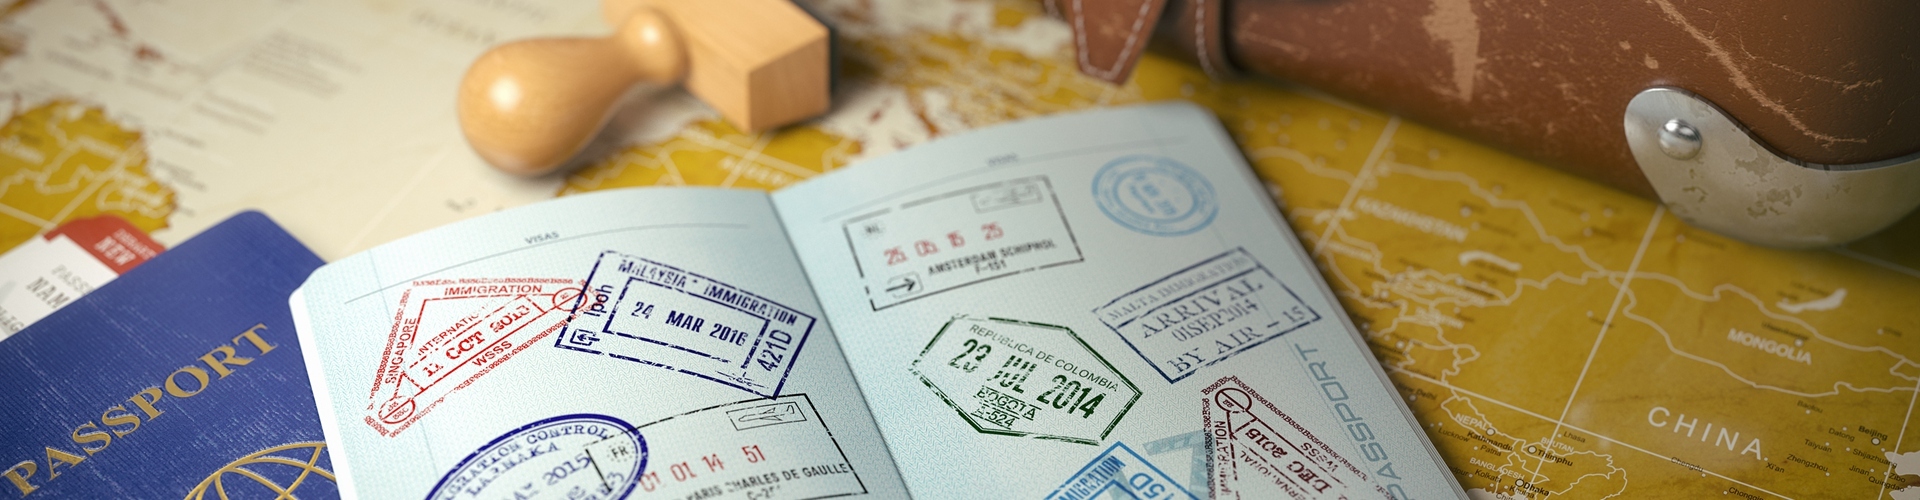 How to Travel to China Without a Visa